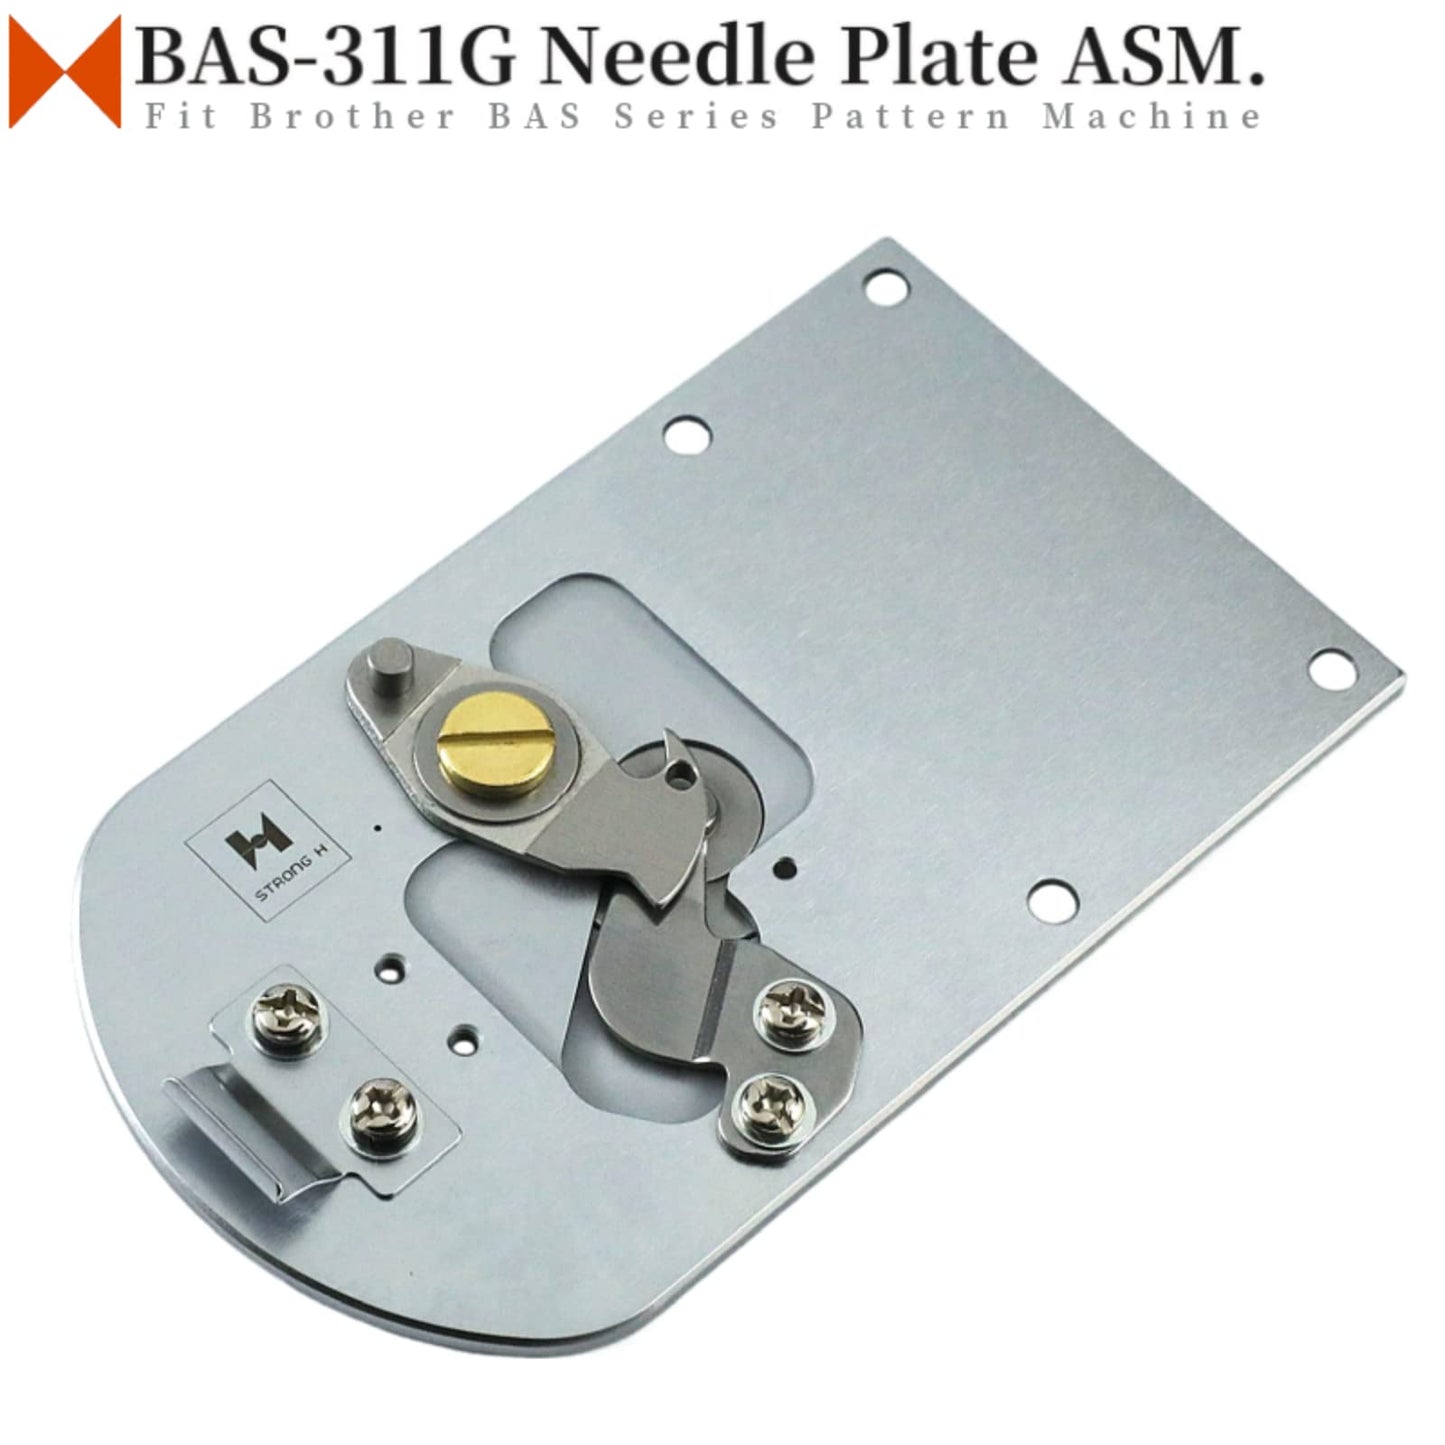 Blooy - SA5157-000 Needle Plate ASM. For Brother BAS-311G, BAS-326G, BAS-342G Programmable Pattern Sewing Machine Parts Thread Cut Blade